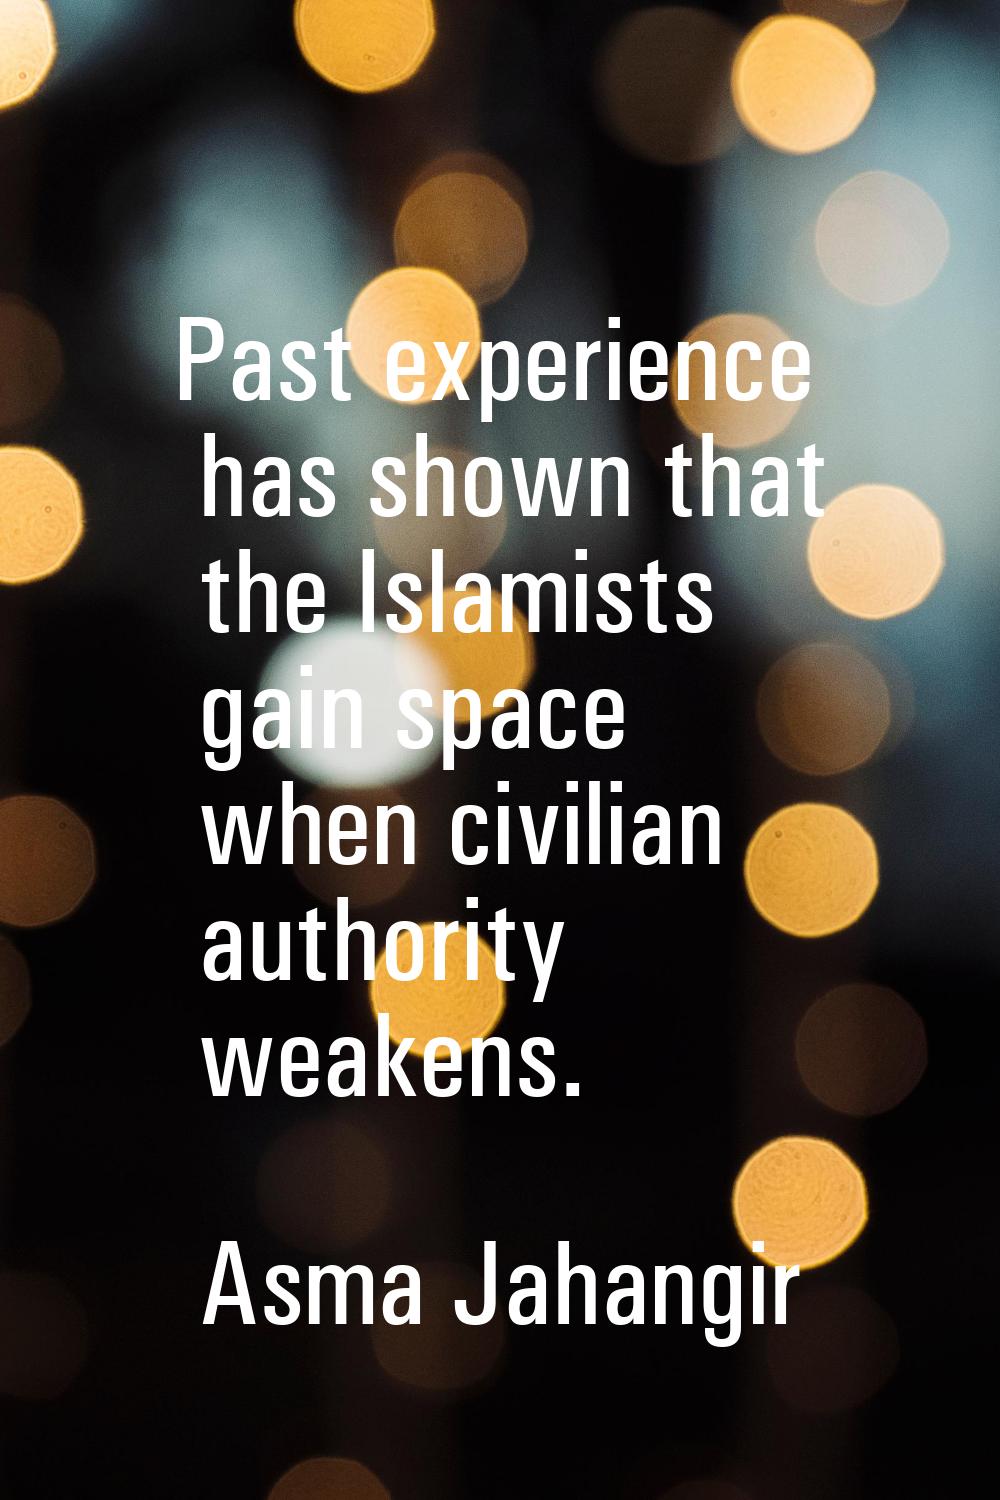 Past experience has shown that the Islamists gain space when civilian authority weakens.